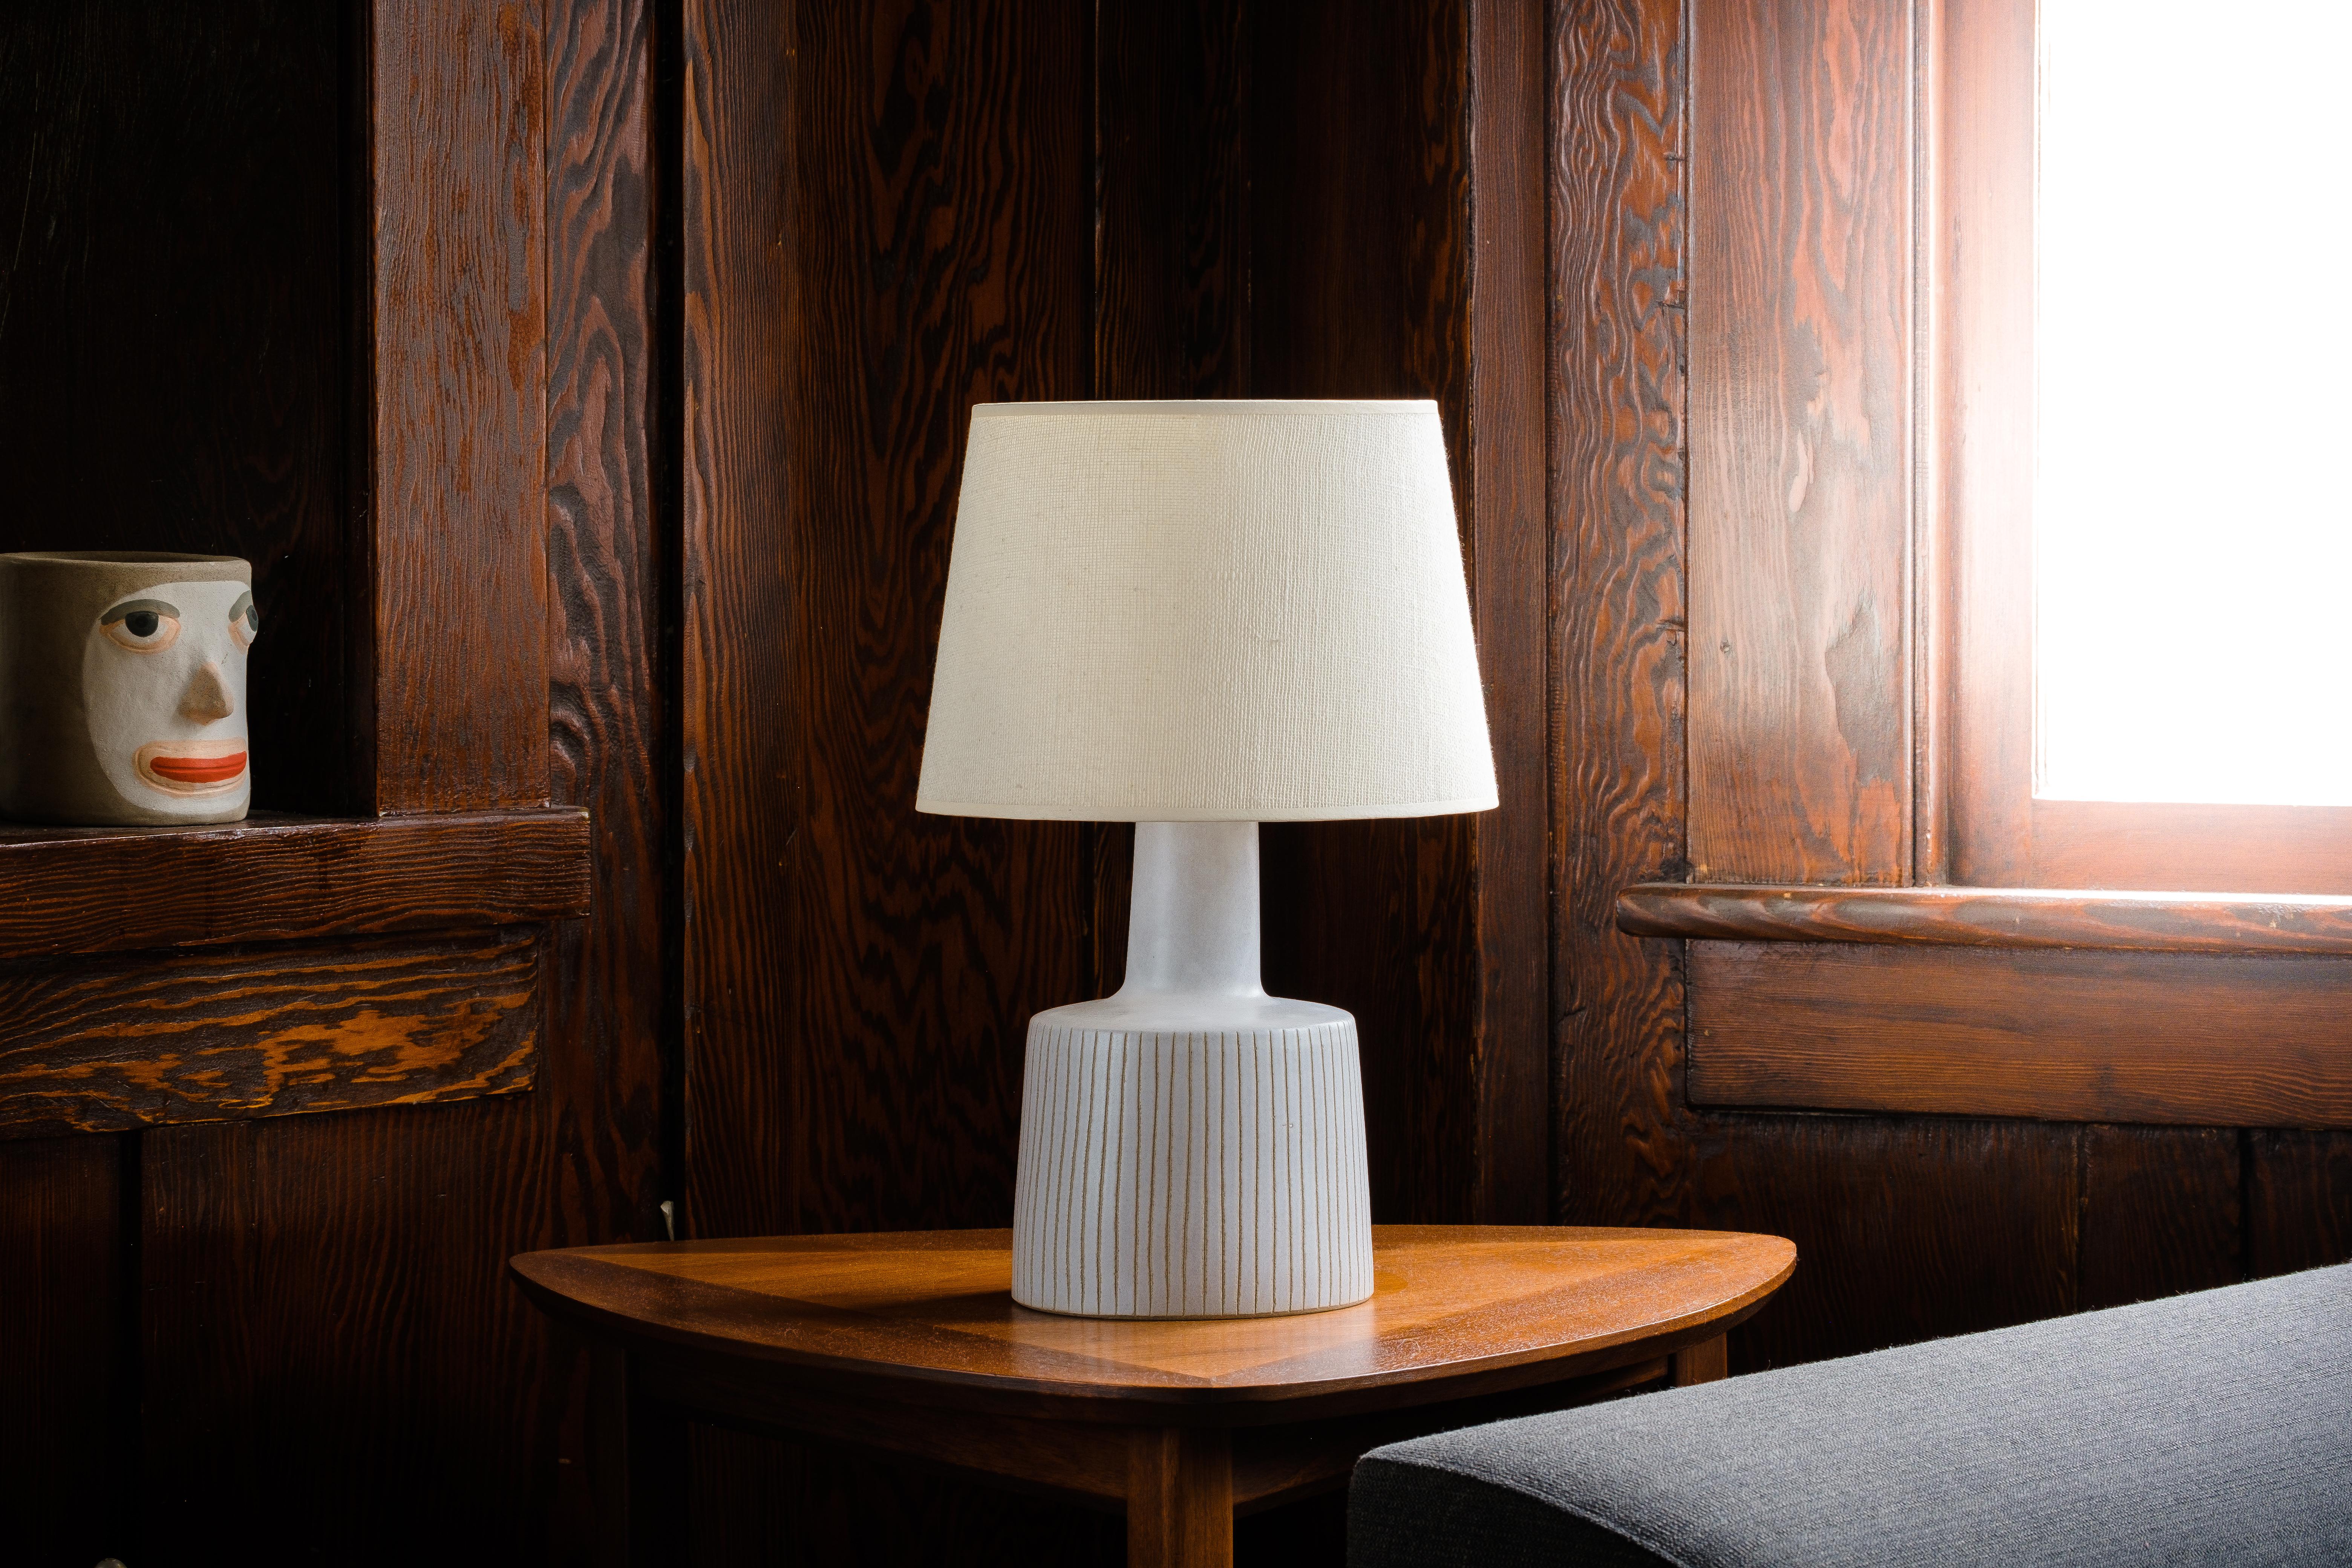 What is it?
—
Another gem from the masters of midcentury lightning – Gordon and Jane Martz.

This signed Martz model 105 lamp comes in a matte white glaze with a vertical stripe incised design. A simple, but very much sought after Martz